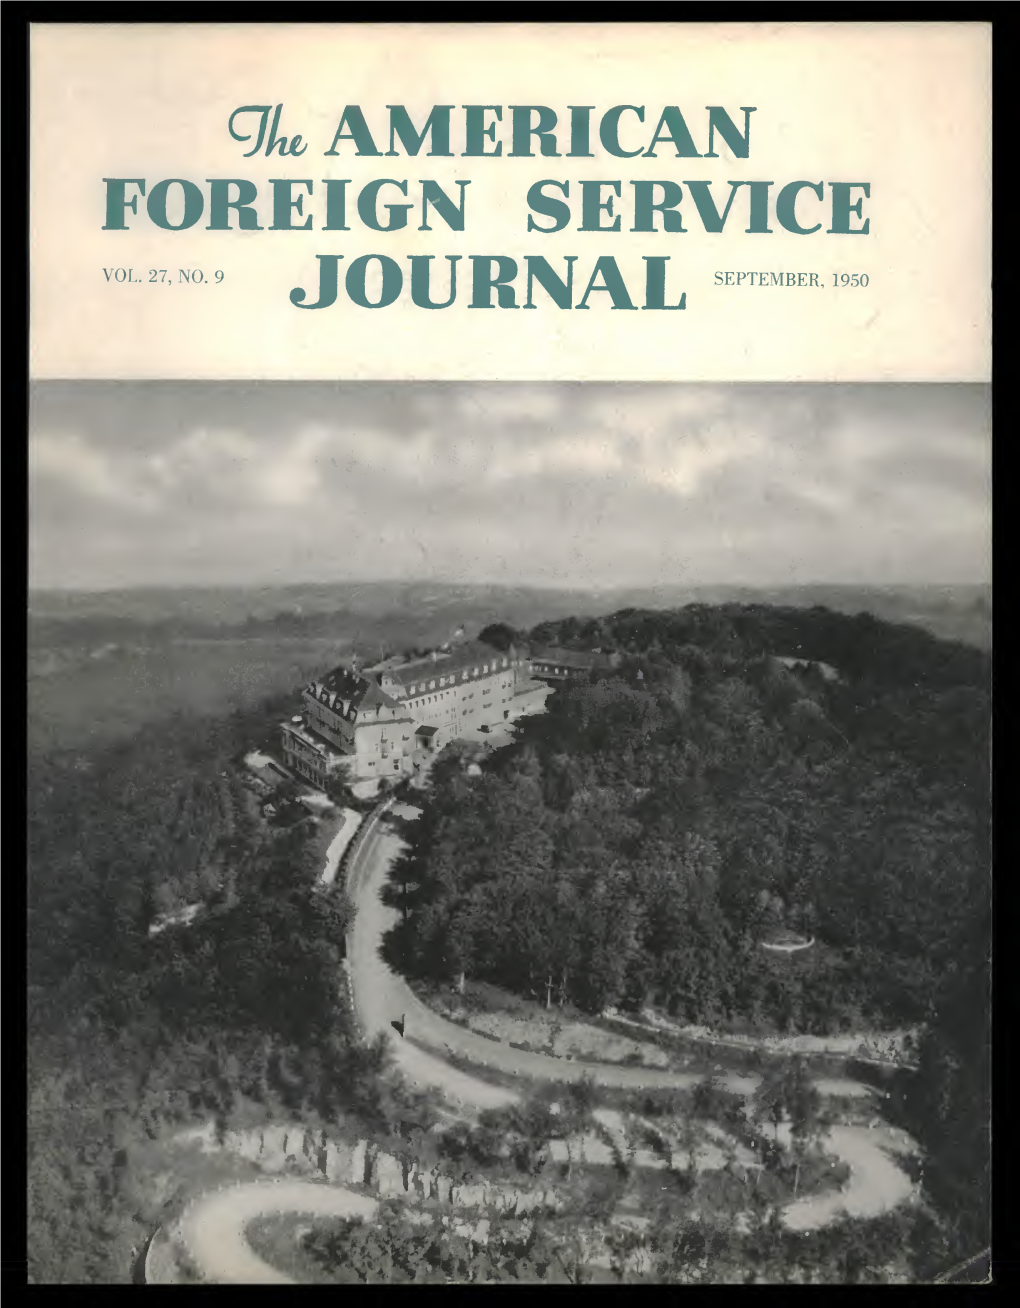 The Foreign Service Journal, September 1950